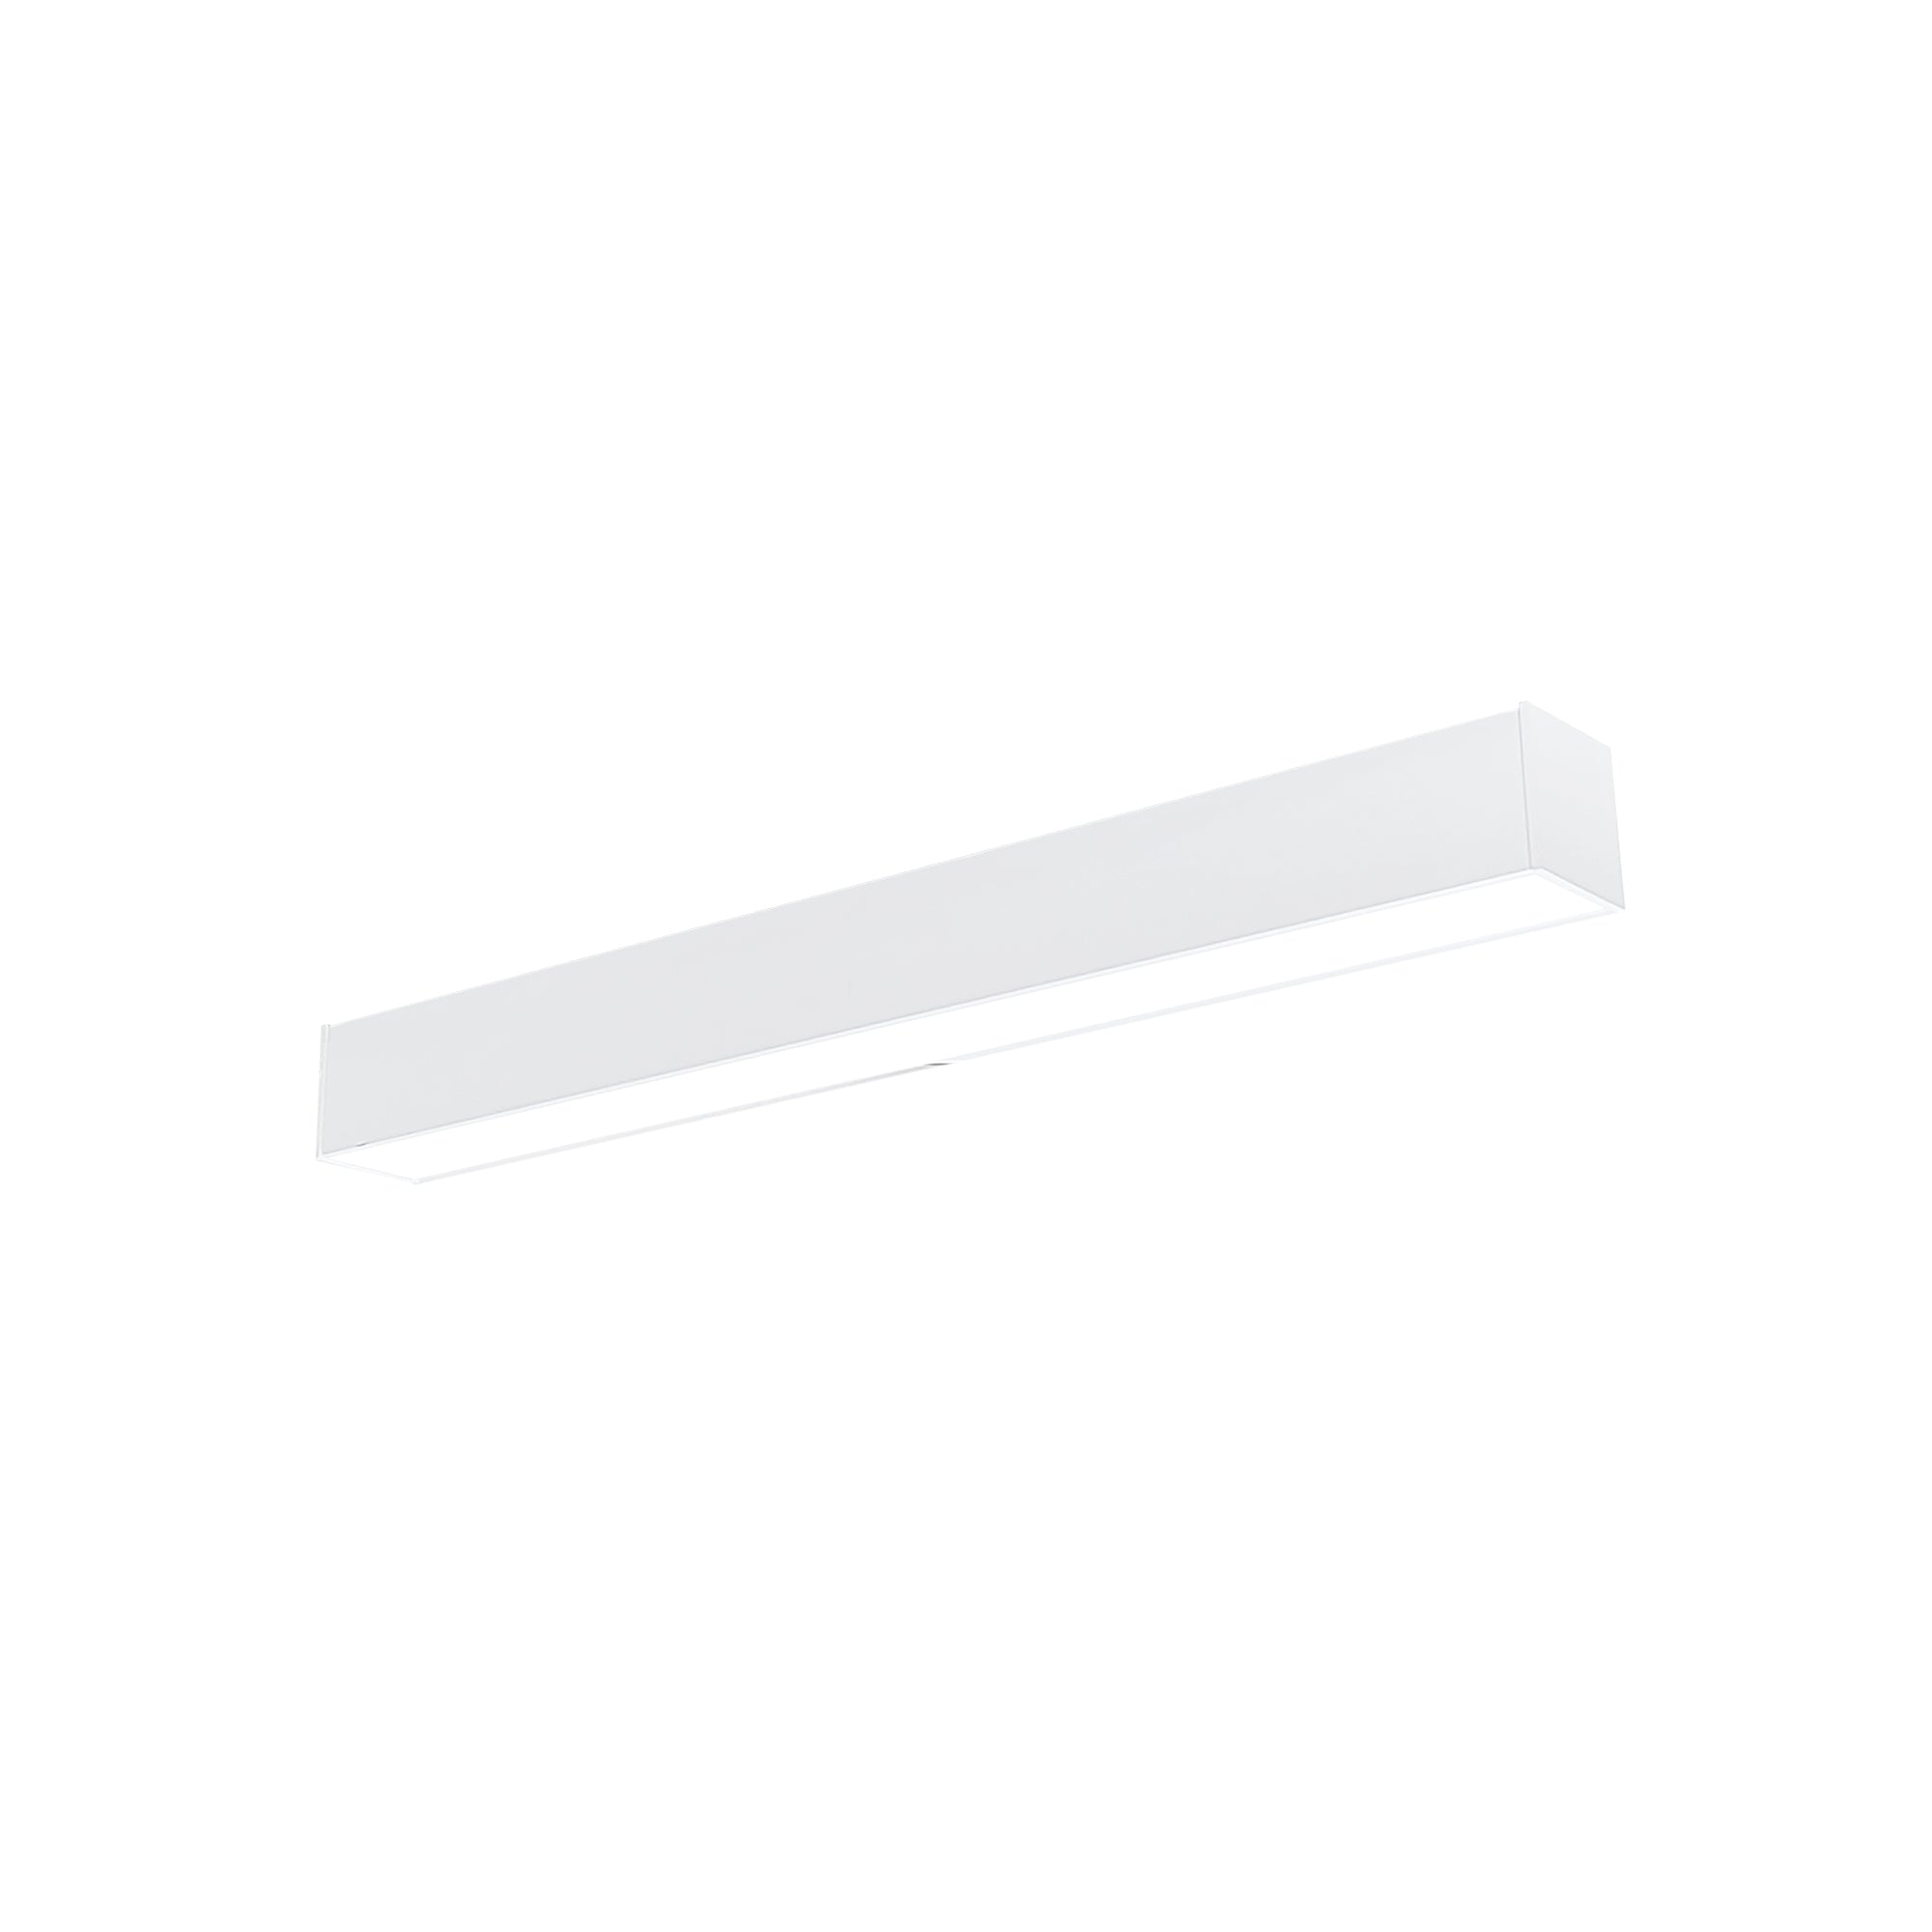 Nora Lighting NLINSW-2334W - Linear - 2' L-Line LED Direct Linear w/ Selectable Wattage & CCT, White Finish